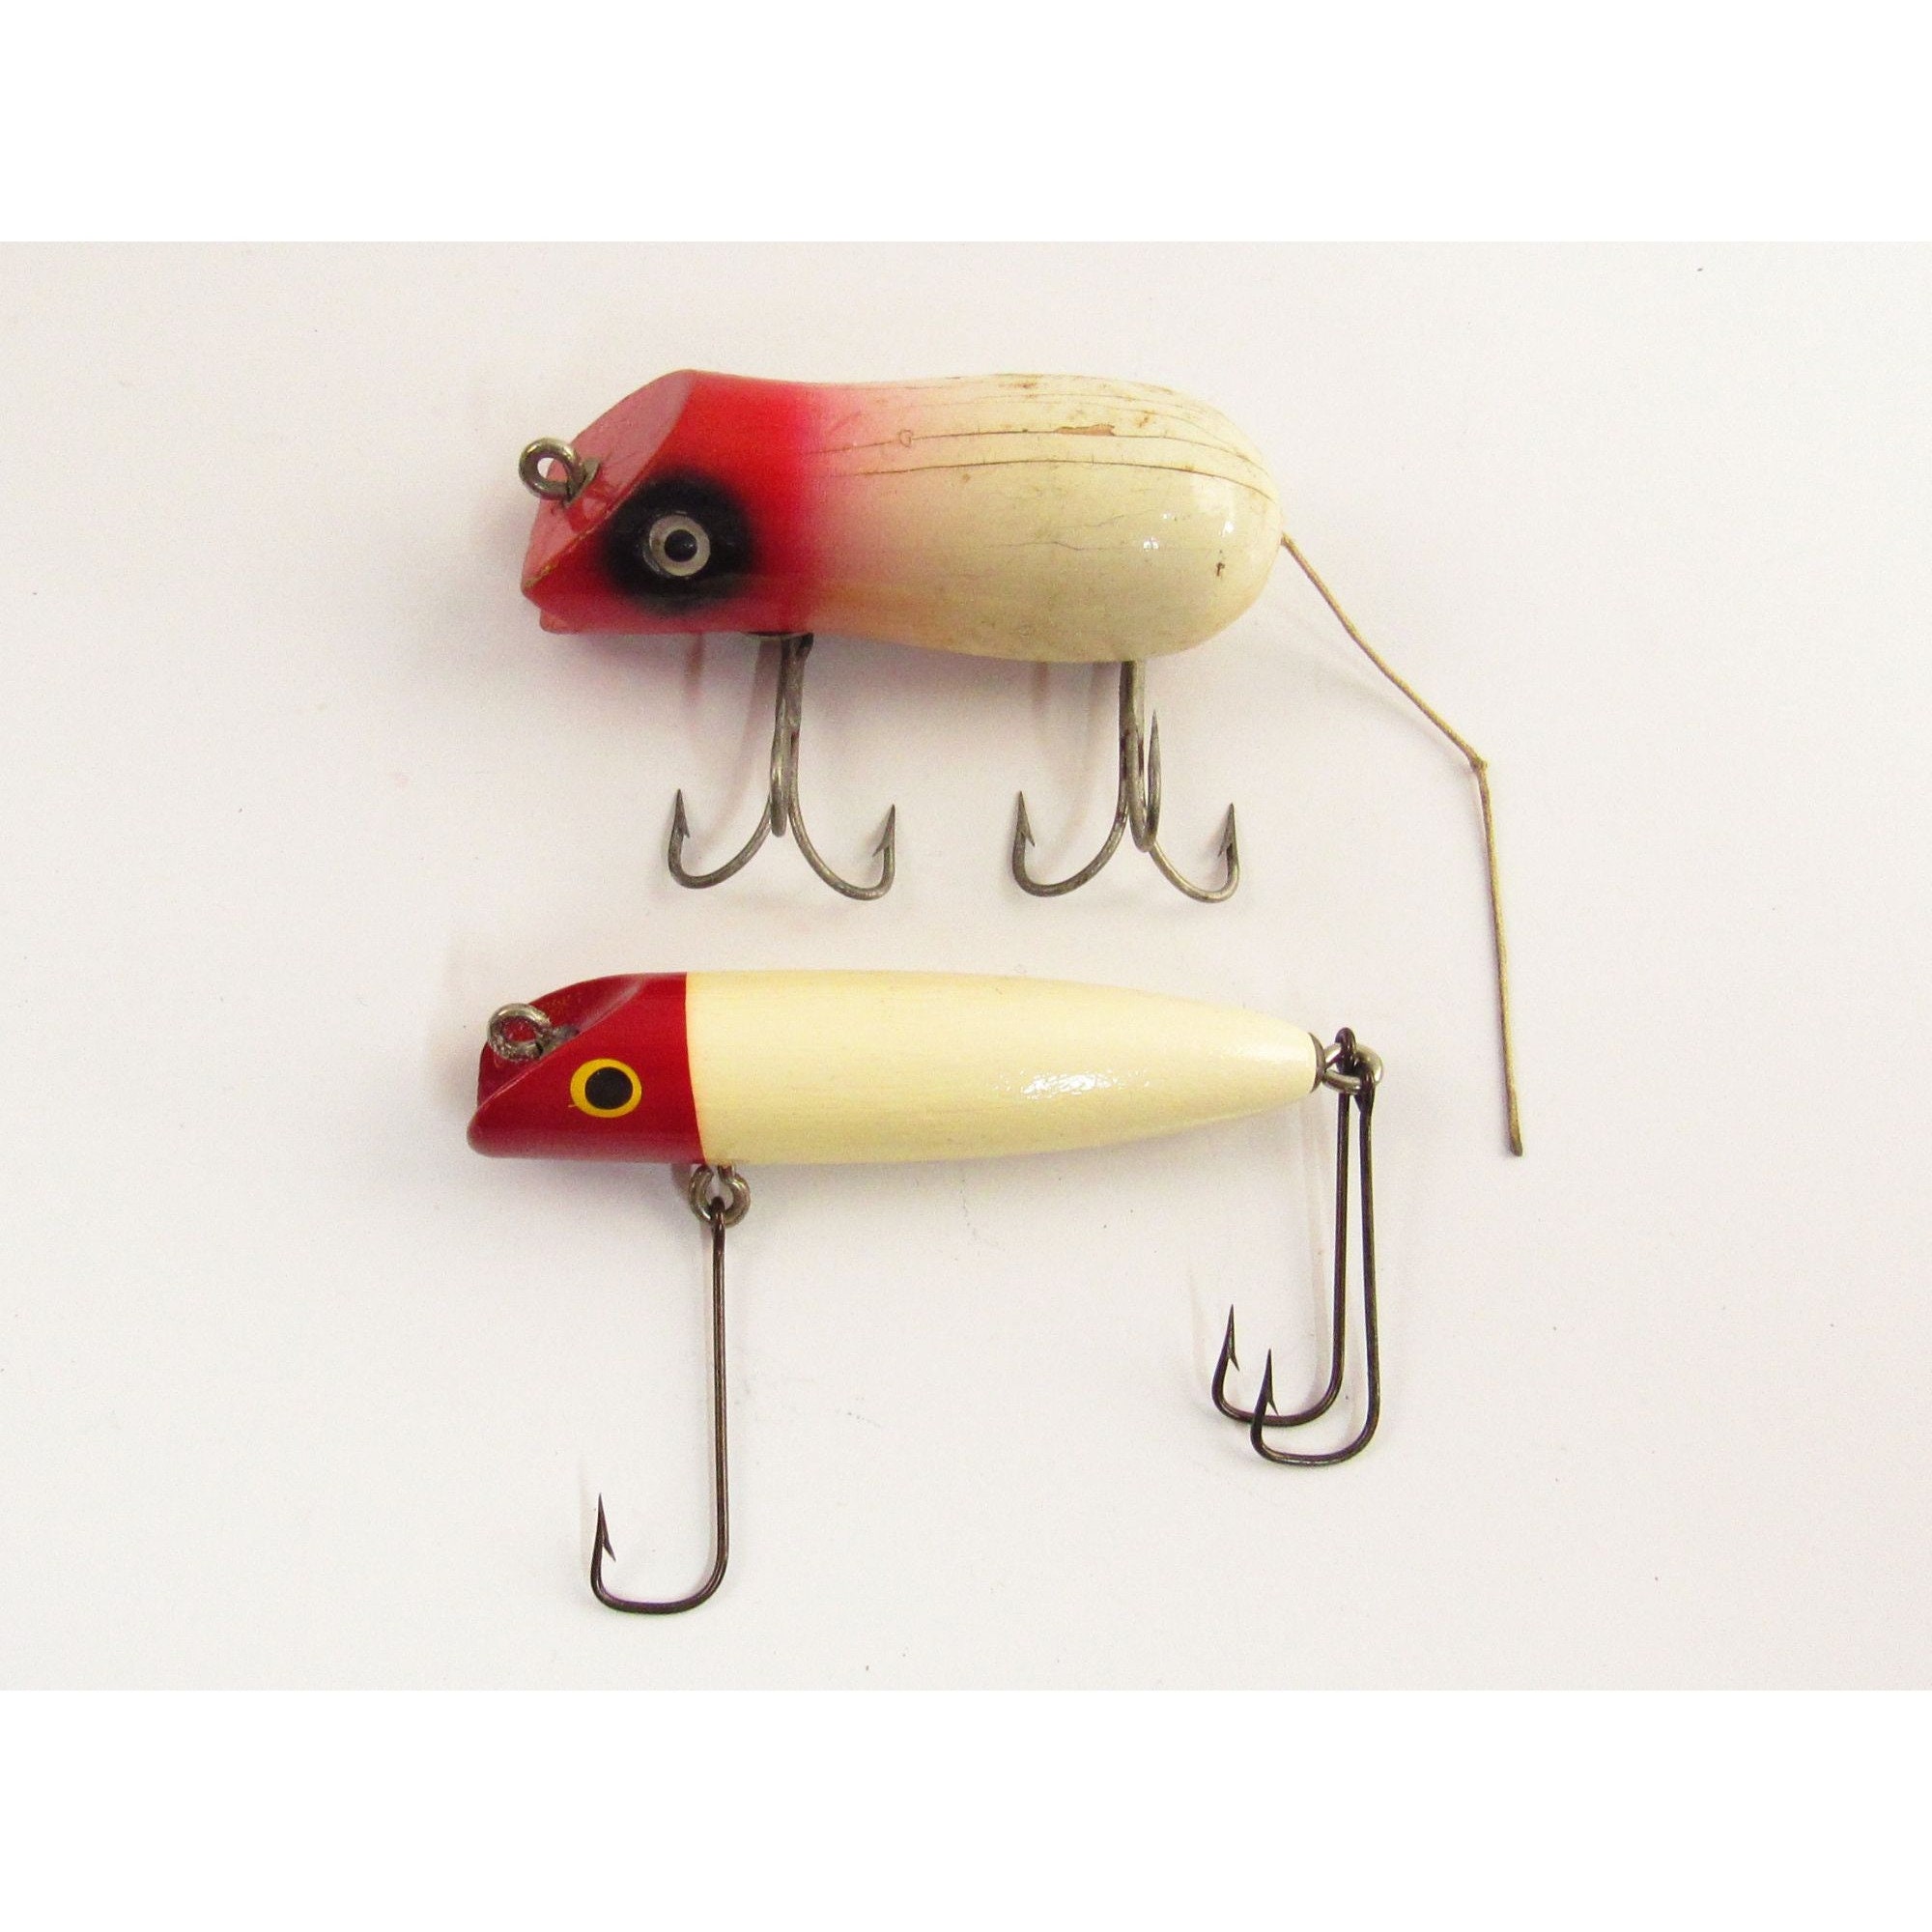 Marty's Mighty Mouse Wood Fishing Lure and an Unsigned Wood Lure L147